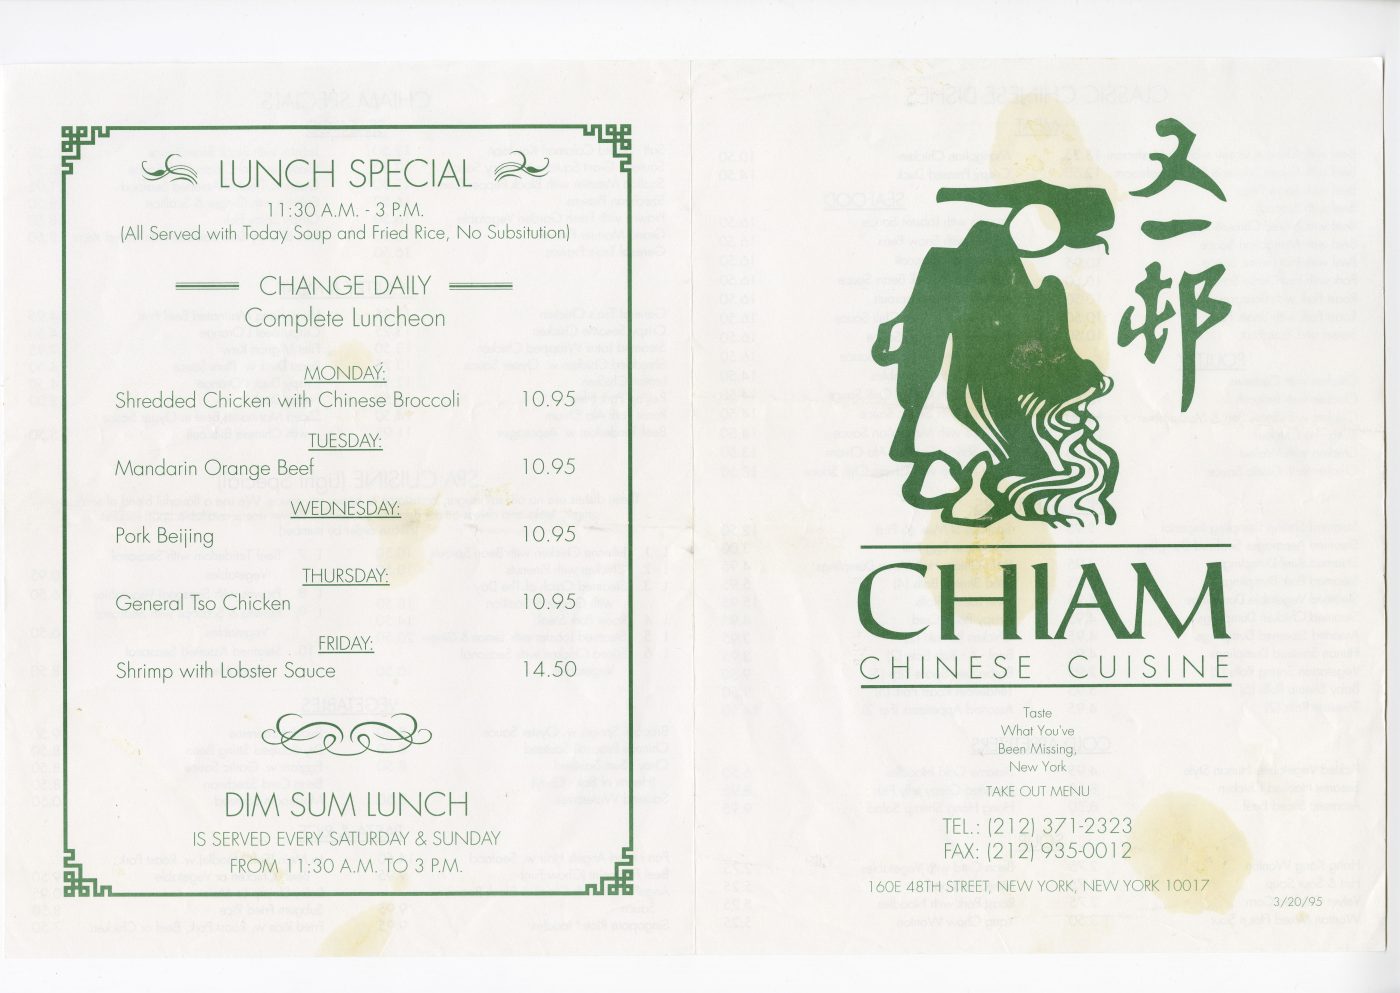 Chiam Chinese Cuisine menu front. Courtesy of University of Toronto Scarborough Library. Museum of Chinese in America (MOCA) Collection.